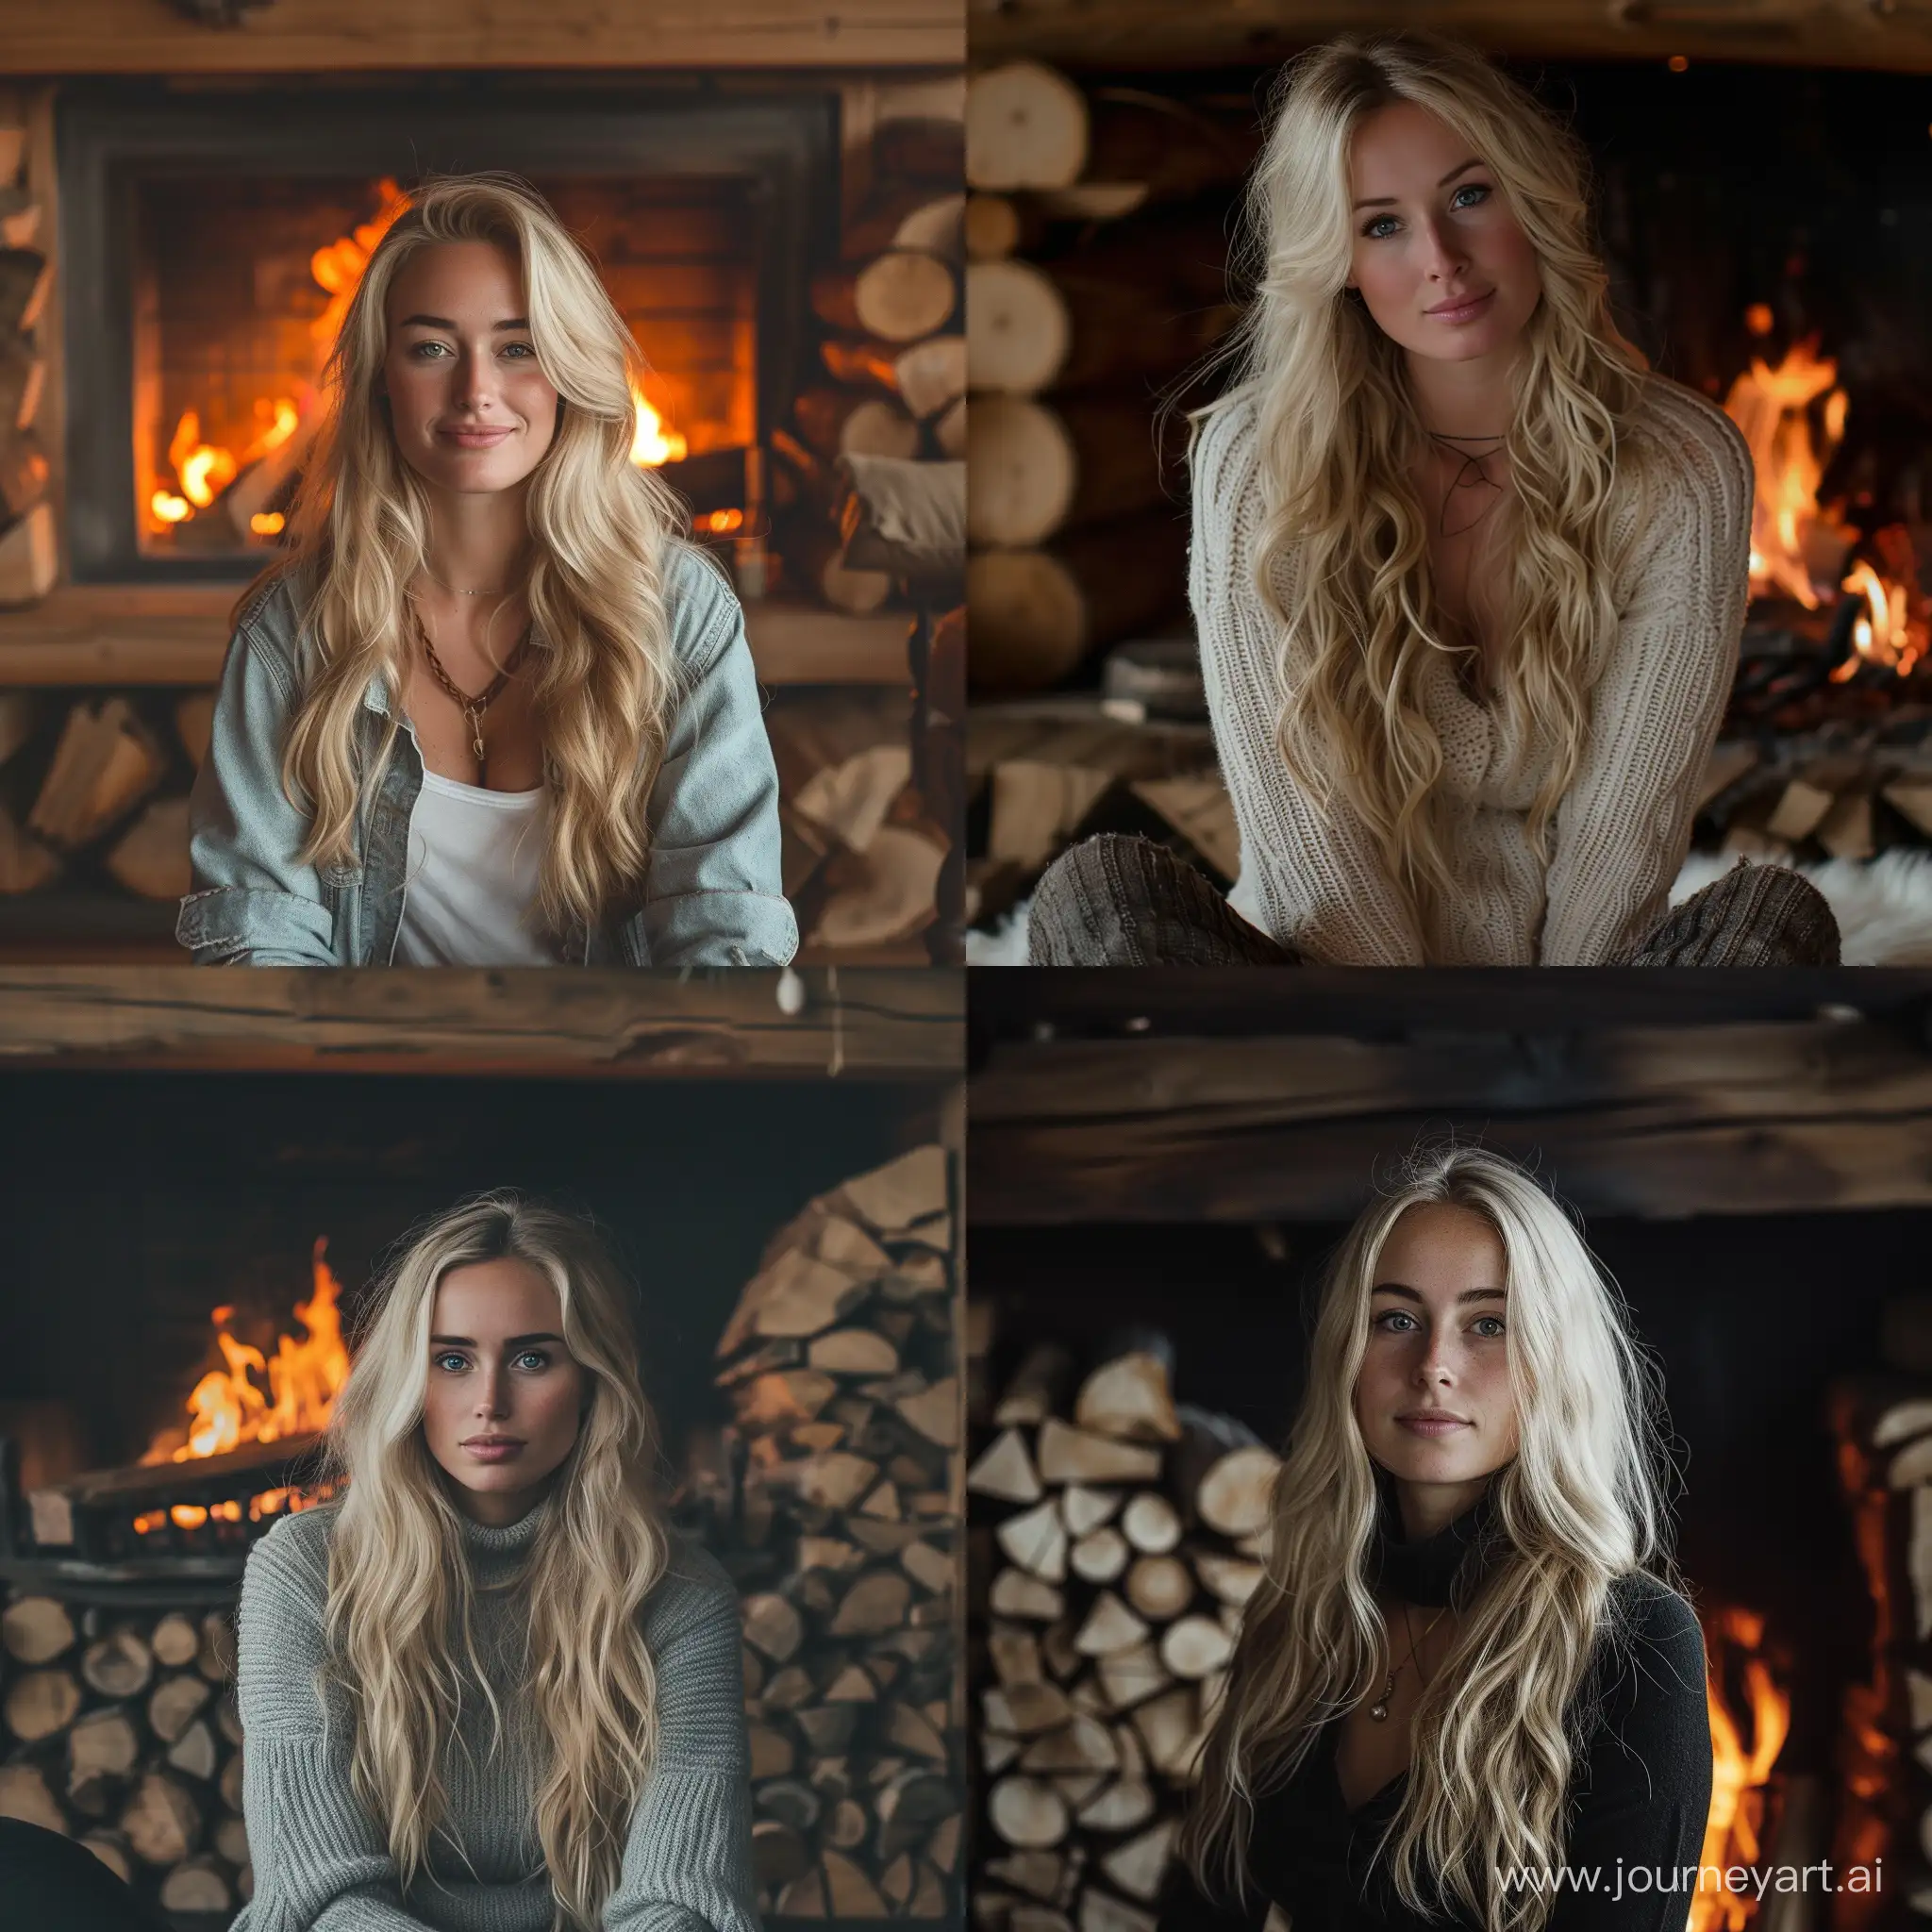 Elegant-Blonde-Woman-by-Fireplace-in-Rustic-Wood-Interior